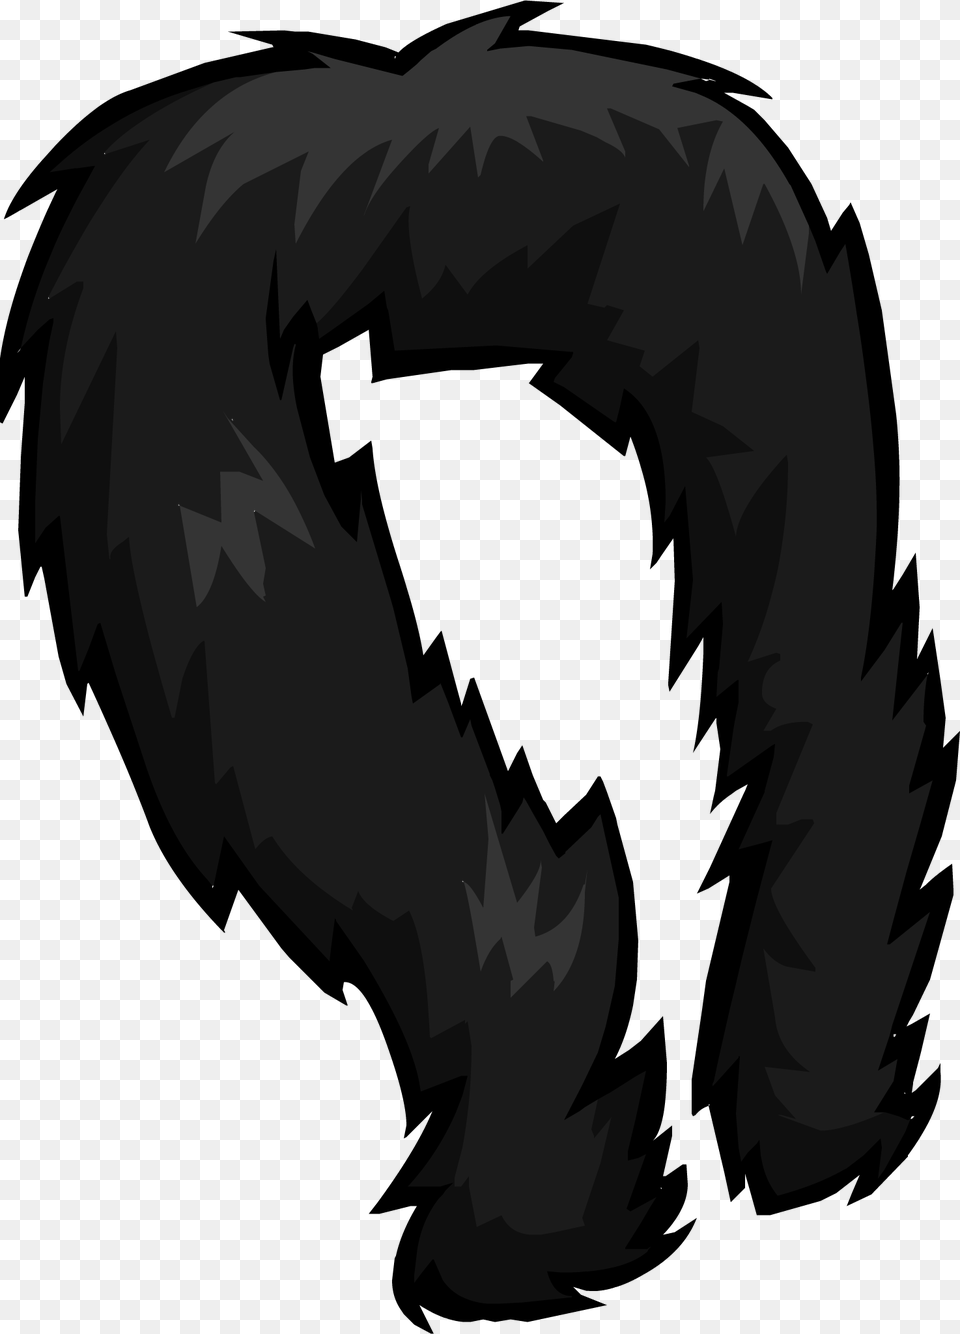 Black Feather Boa Neck Item Feather Boa Clipart, Person Png